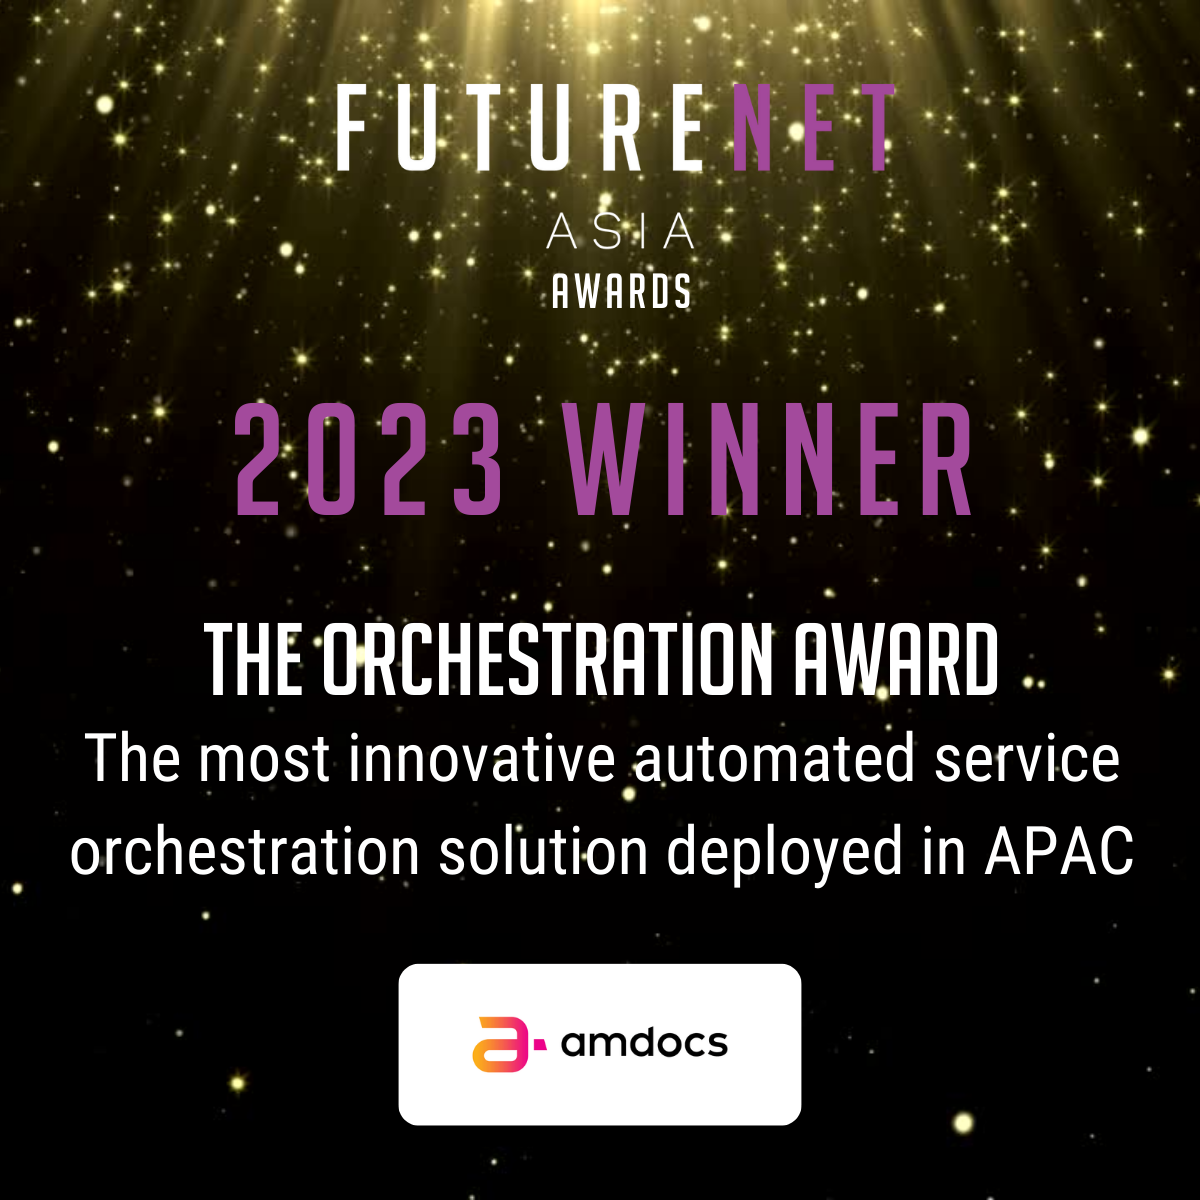 Winner - FutureNet Asia Orchestration Award for the most innovative automated service orchestration solution deployed in APAC